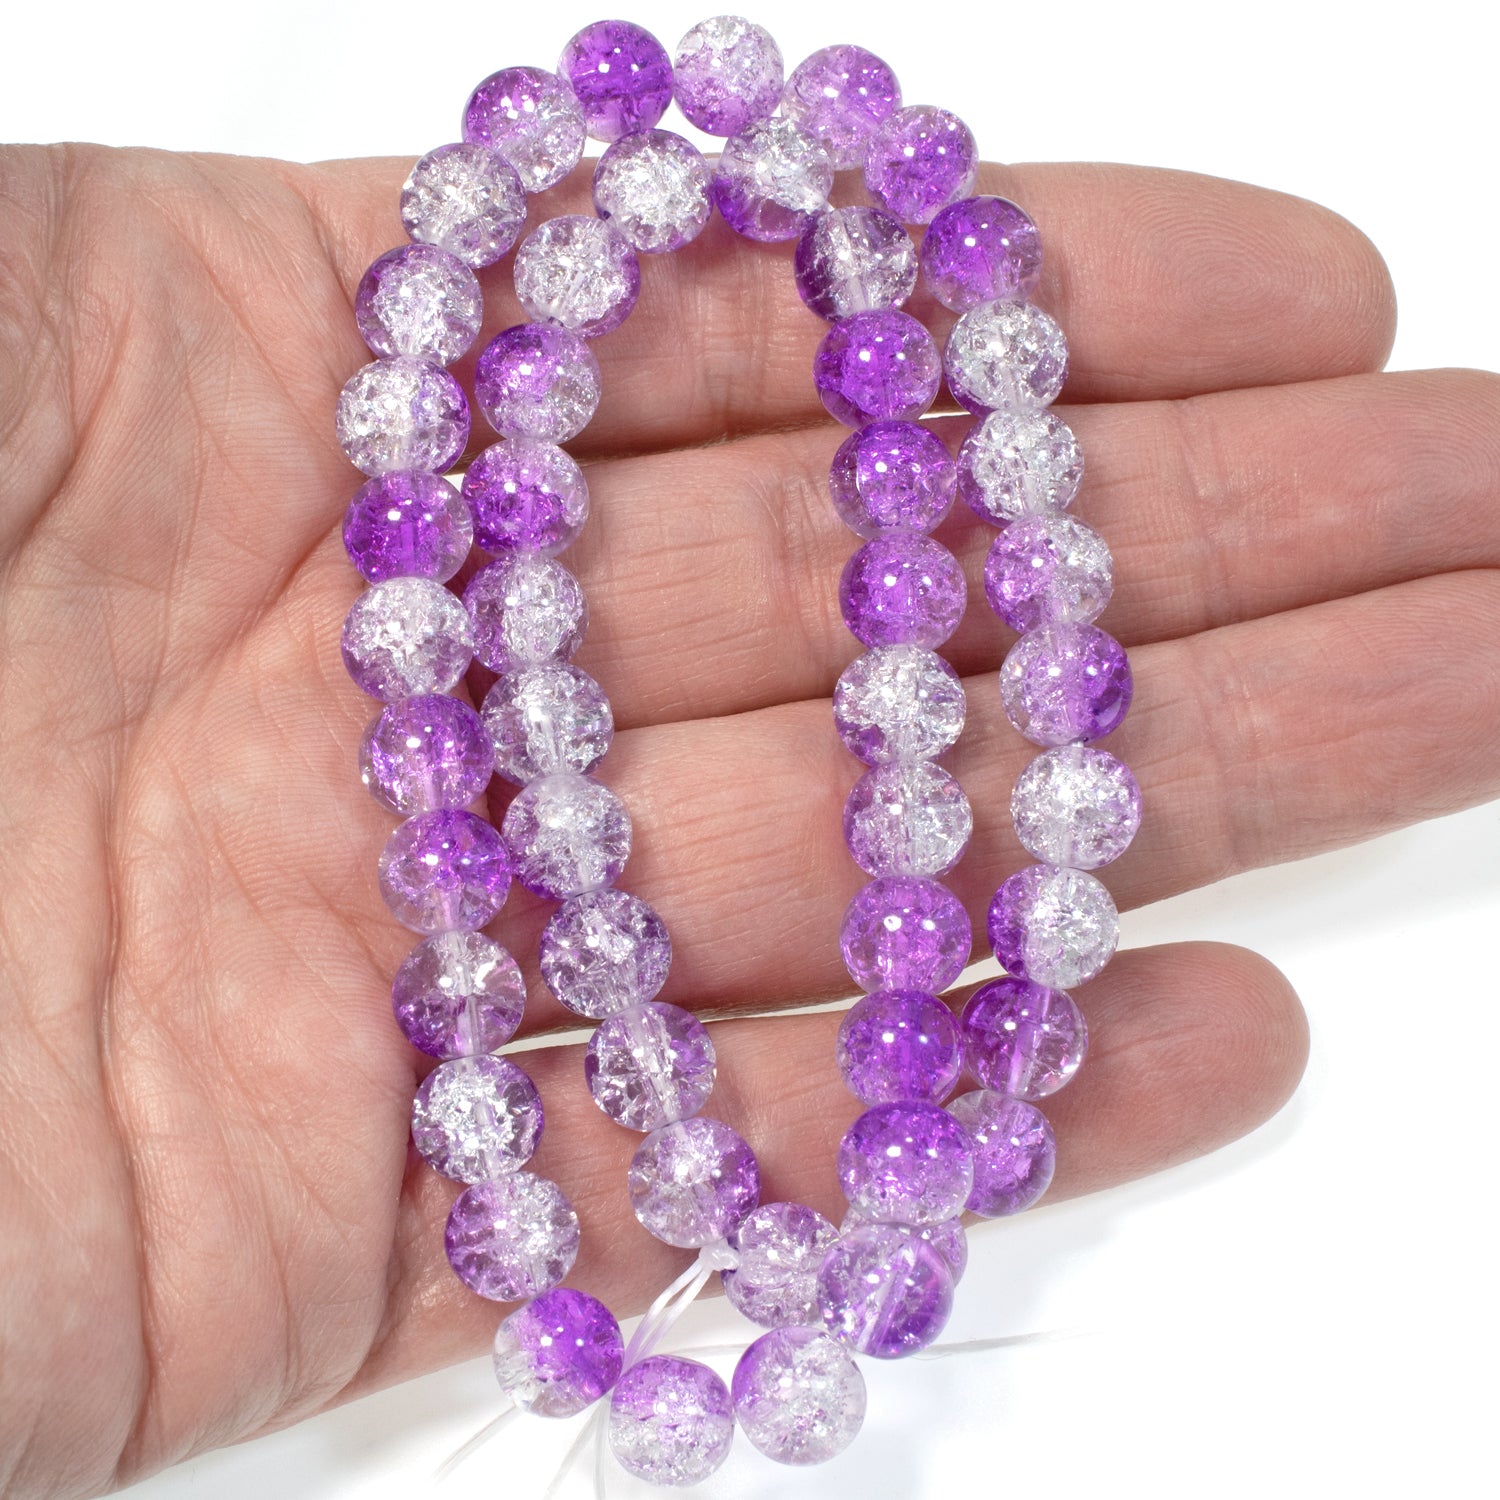 Elegant Purple Glass Beads for Jewelry Making, 8mm Polished Round